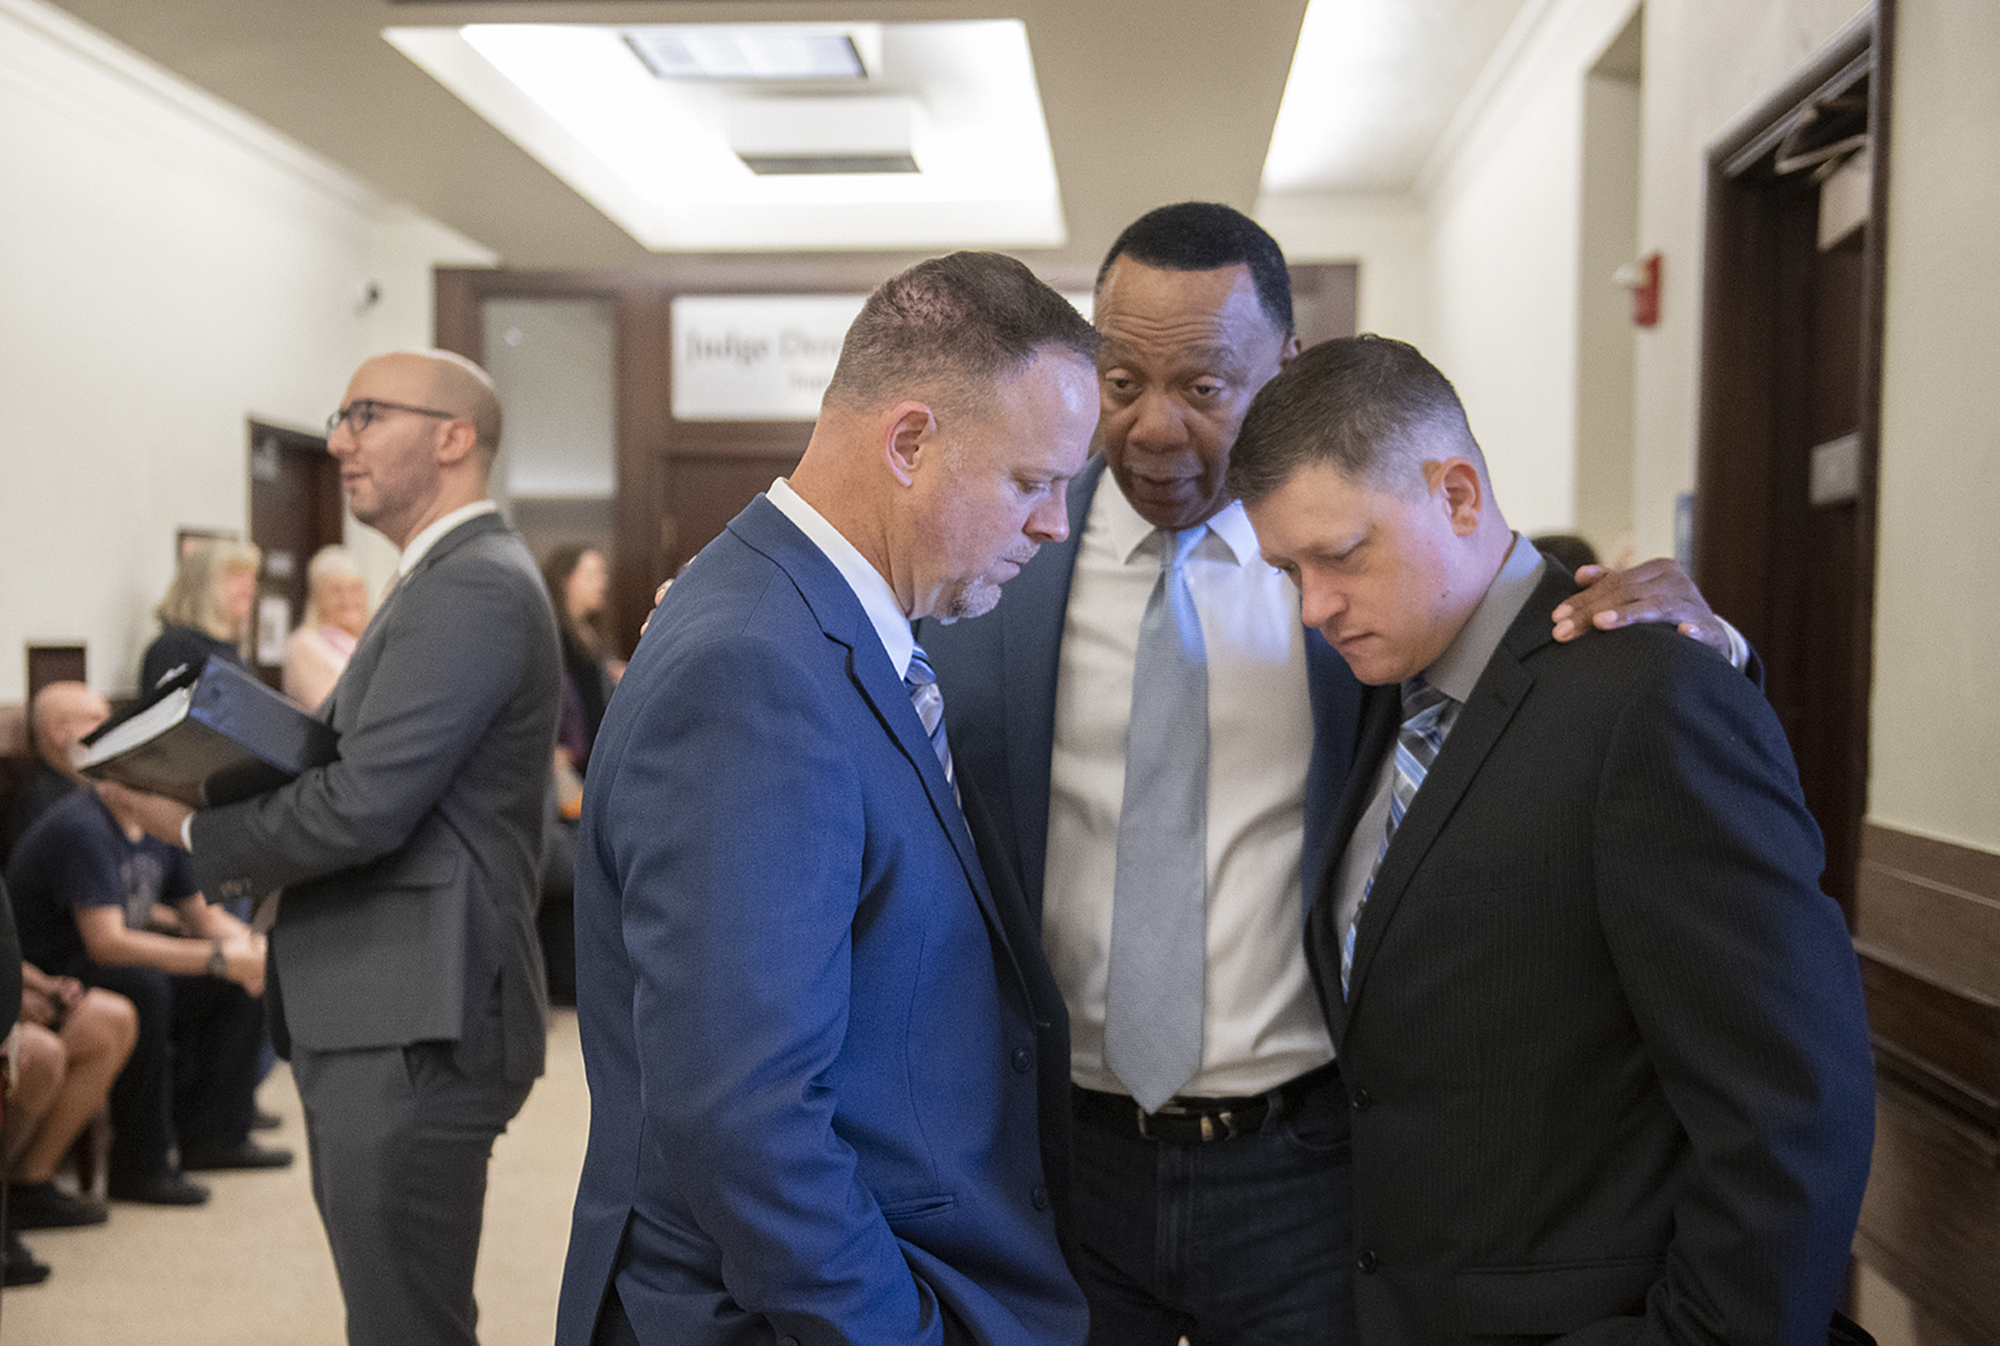 Larch Corrections Center counselor Robert Stricker, blue suit from left, takes a moment to talk with colleagues Sidney Clark and Shawn Piliponis before an injunction hearing concerning the closure of the minimum-security facility, as seen Friday afternoon, Oct. 6, 2023, at the Clark County Courthouse.